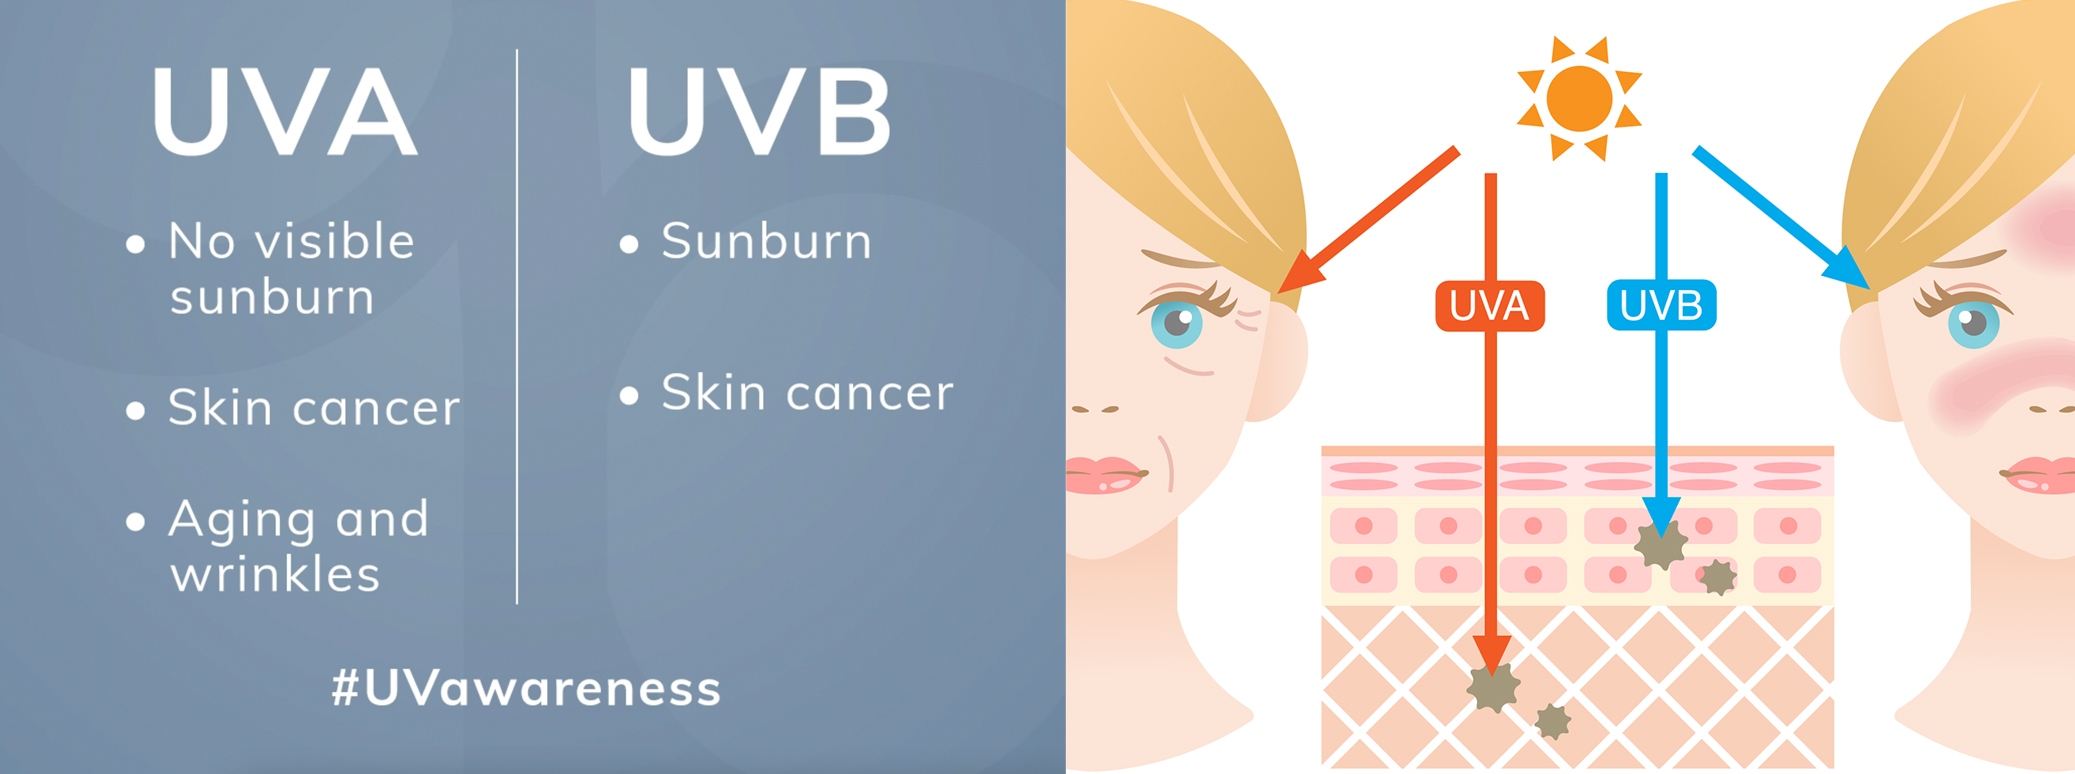 UVA and UVB ray differences